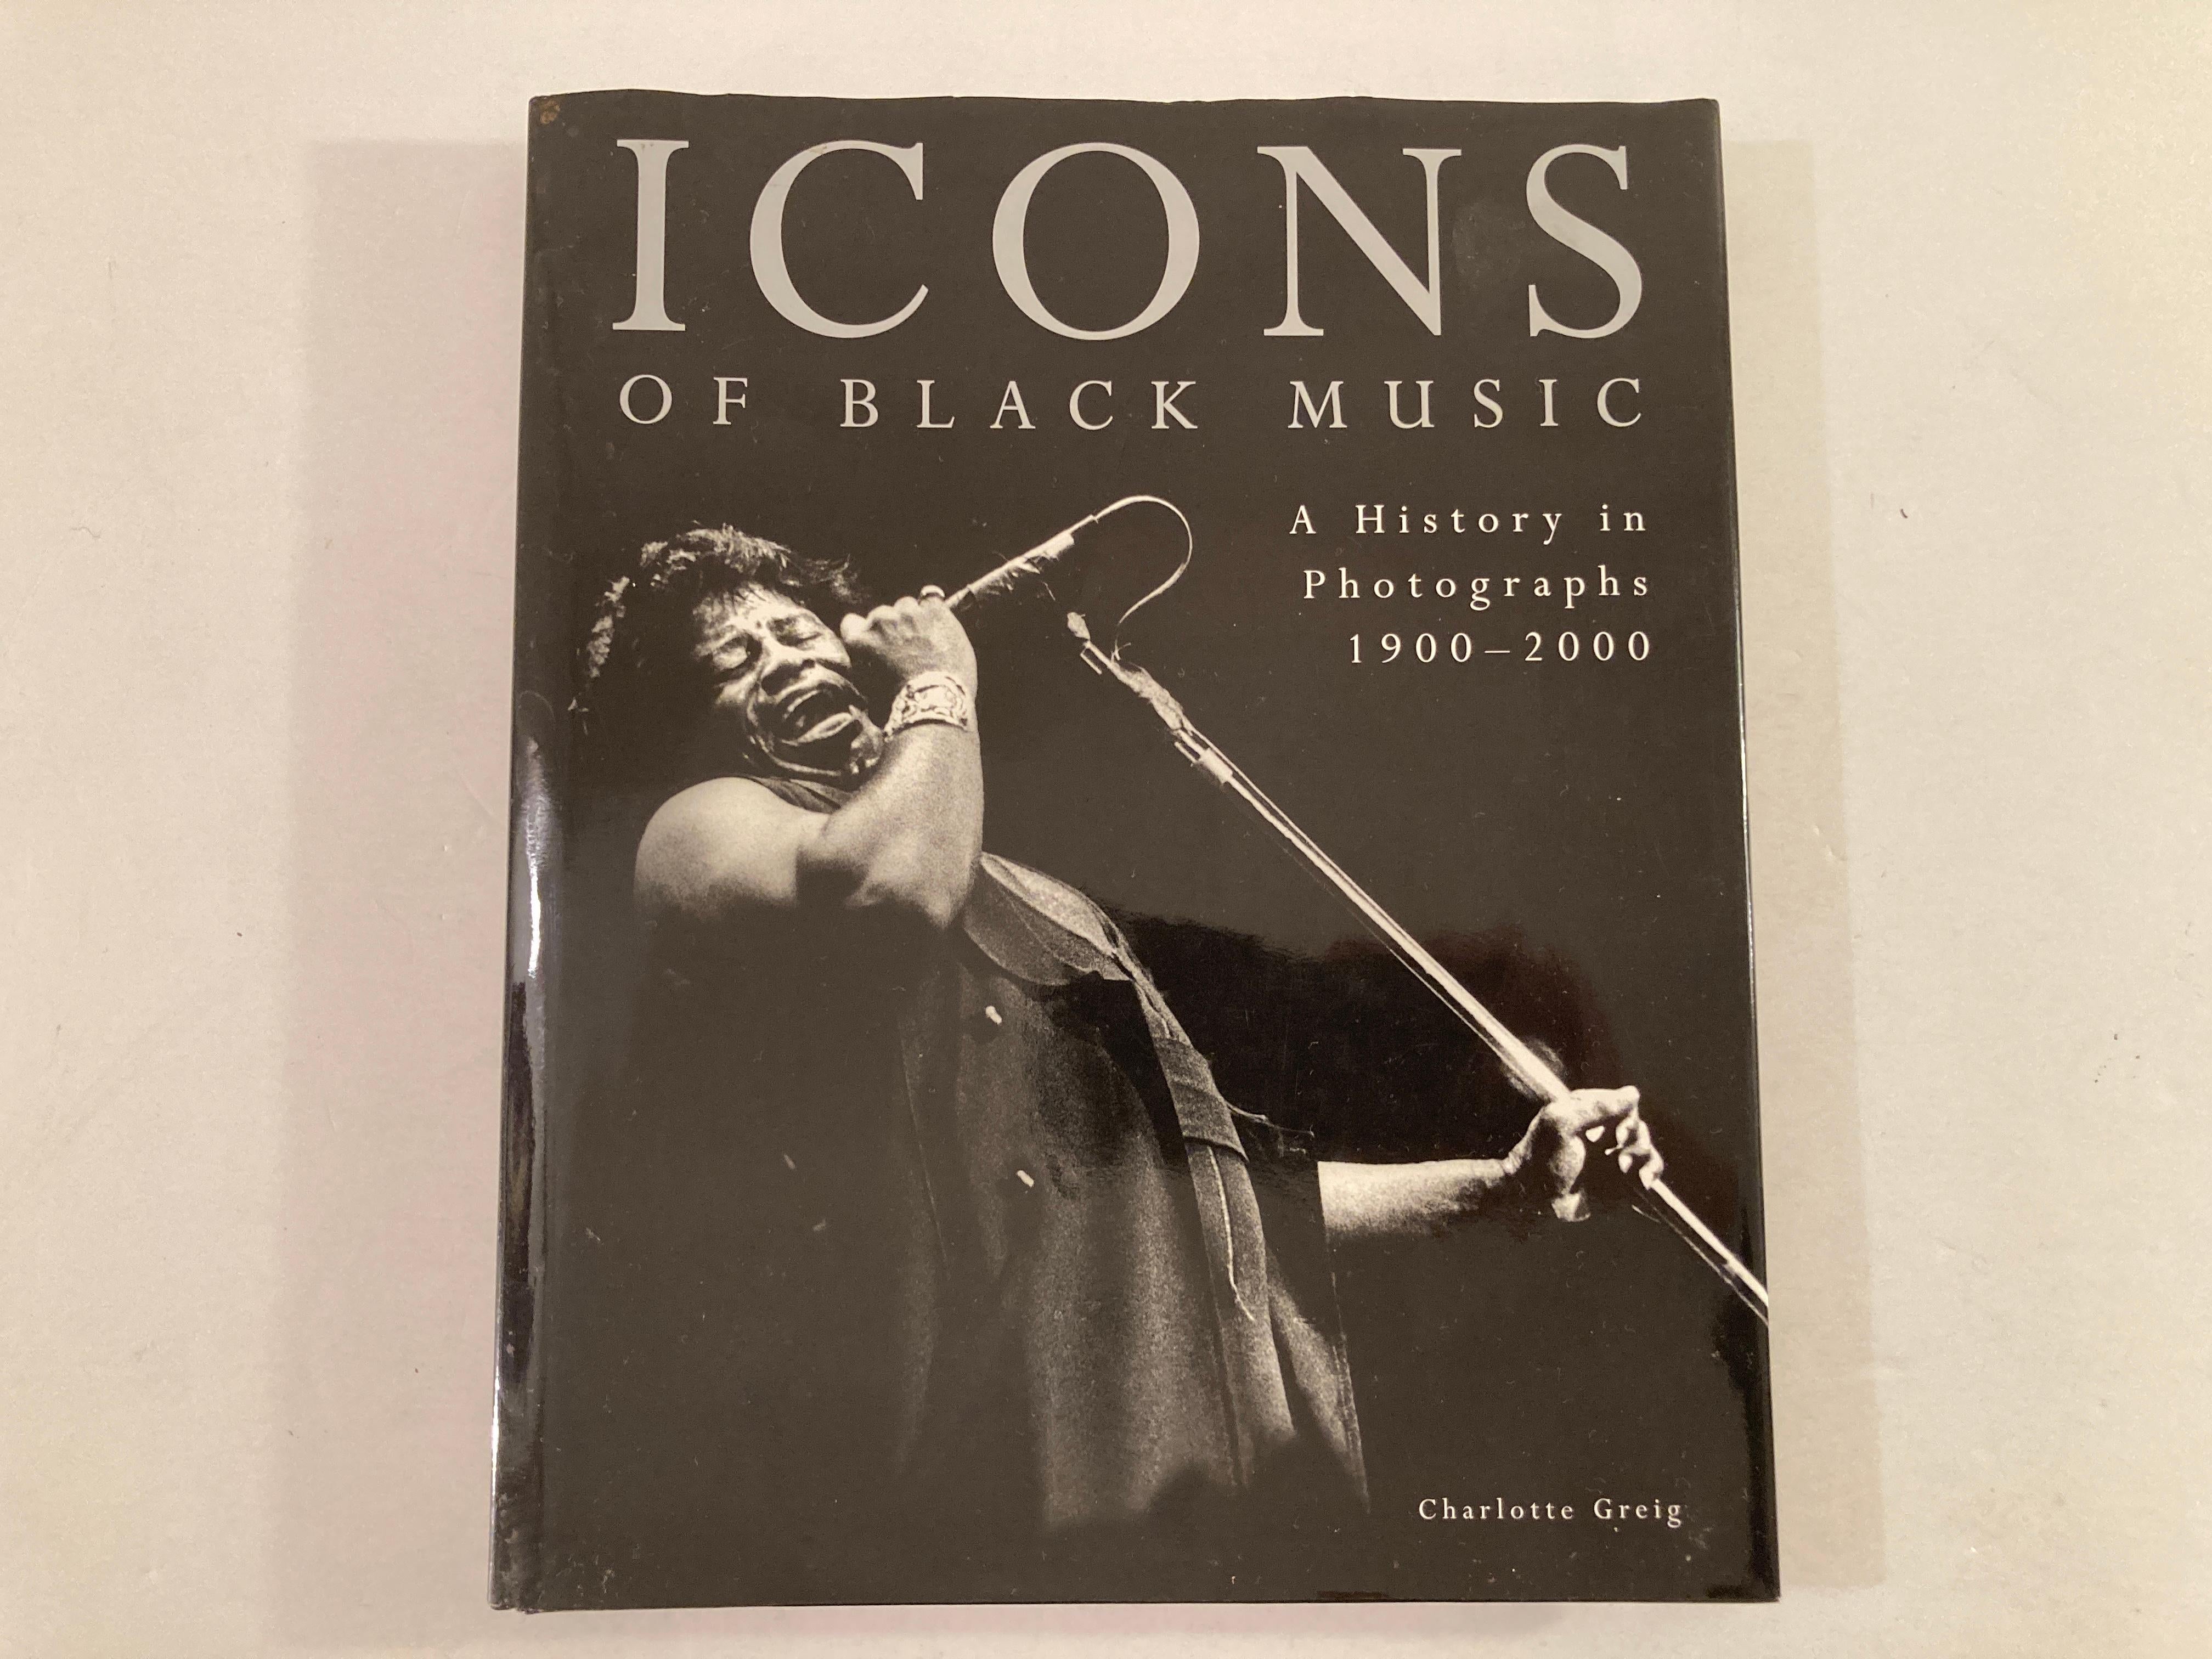 Icons Of Black Music: A History In Photographs, 1900-2000 By Charlotte Greig.
Music · Hardcover · Non-fiction · 176 page
A photographic collection of eighty of the most influential musicians of this century. Stunning black-and-white art